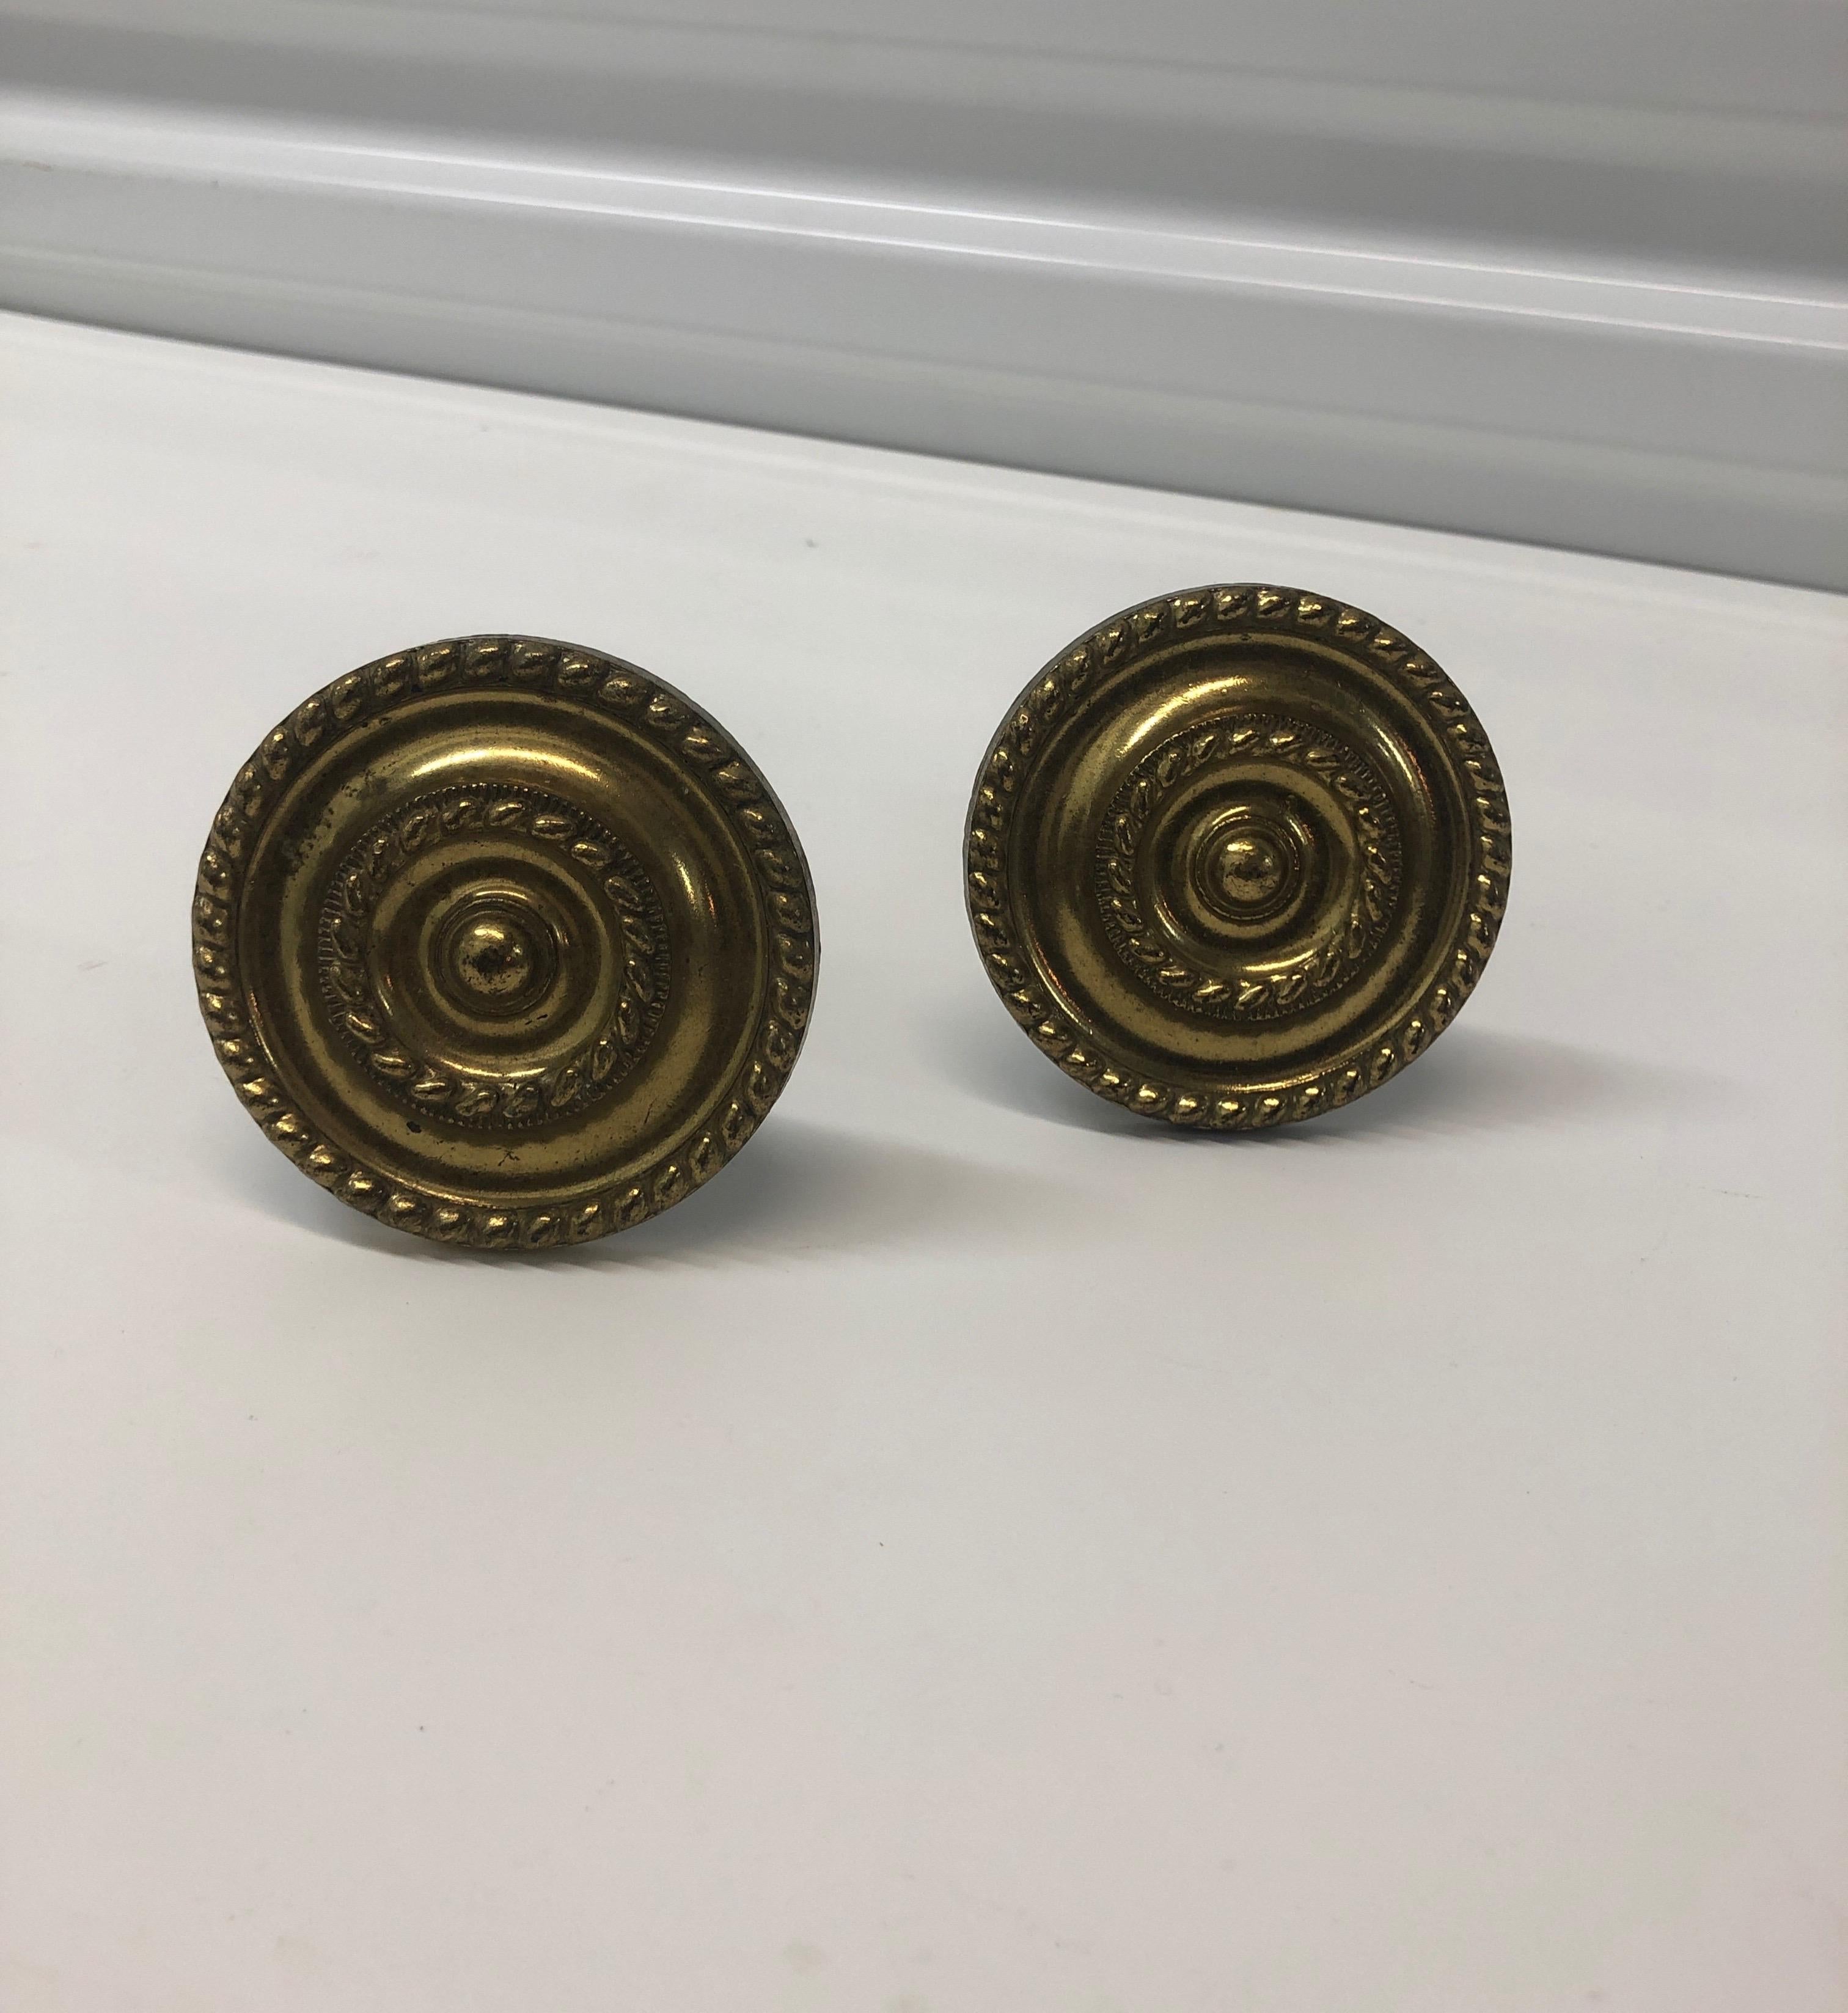 Pair of vintage polished brass curtain tiebacks
Size: 3”D x 3.5”D.